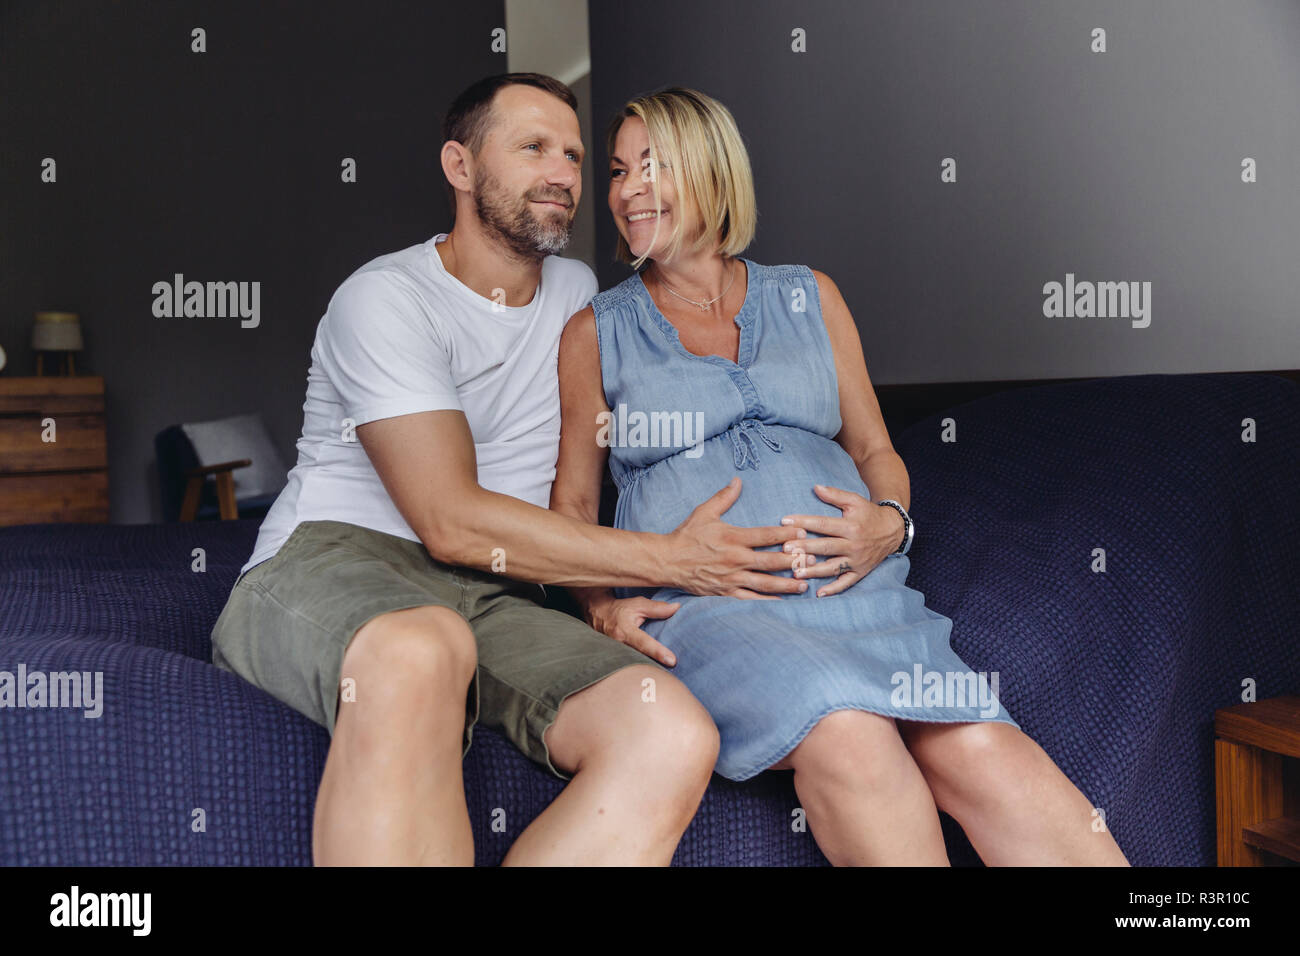 Homme mûr et sa femme mature enceinte sitting on bed touching her belly  Photo Stock - Alamy